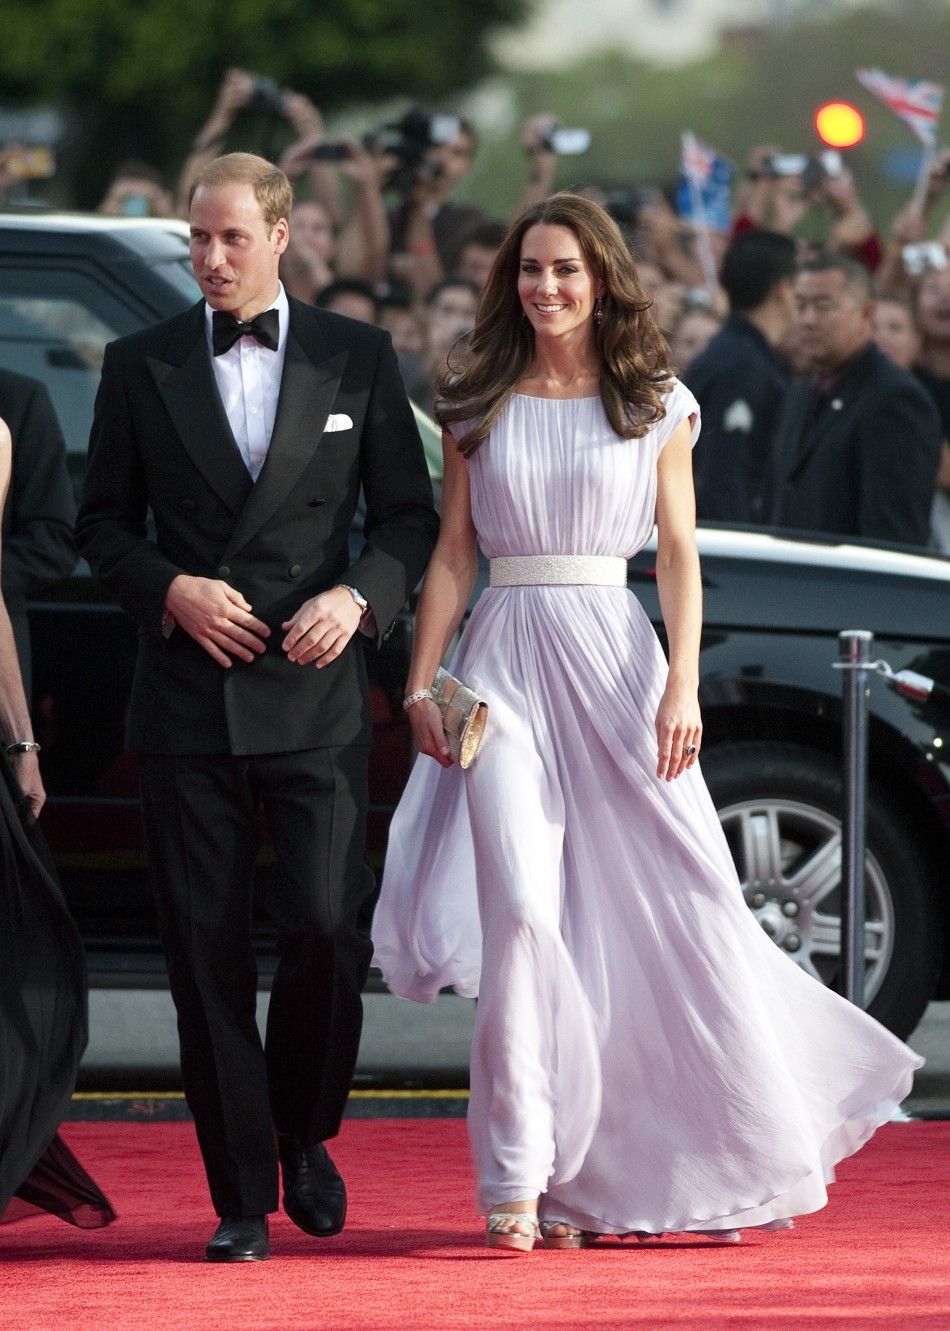 Britian039s Prince William and his wife Catherine, Duchess of Cambridge, arrive at the BAFTA Brits to Watch event in Los Angeles